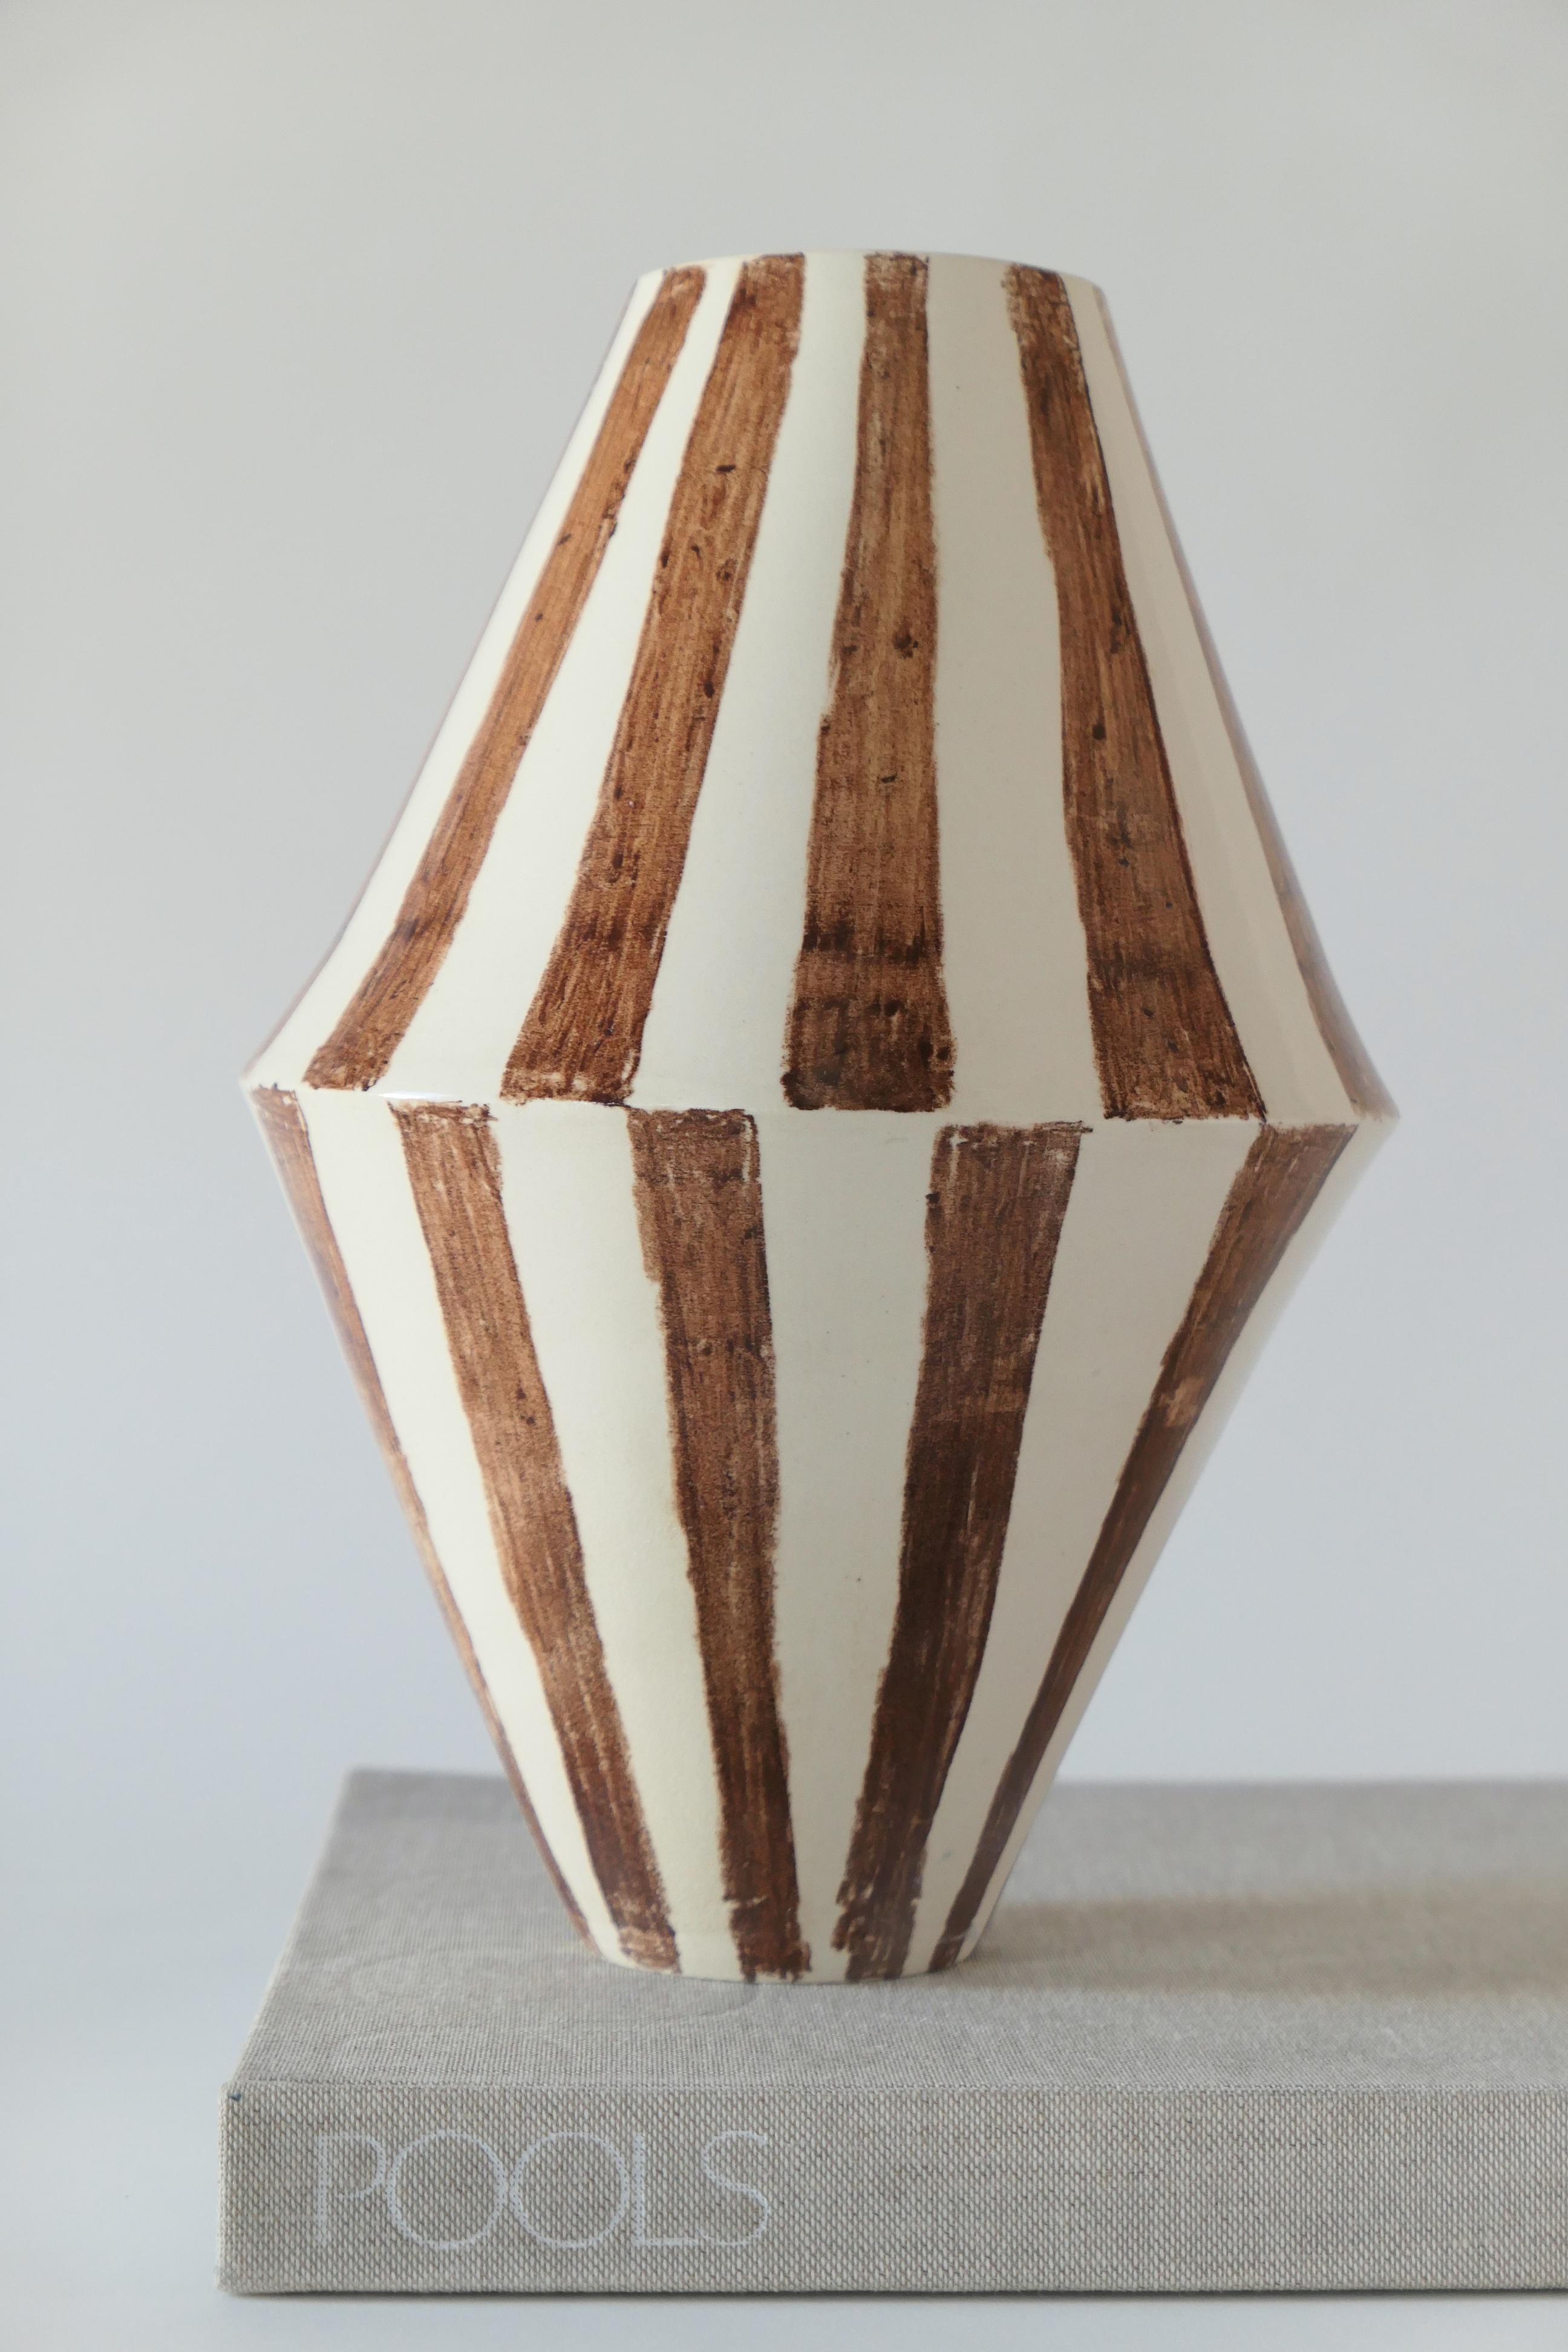 Off-white hand-built stoneware vase hand-painted with brown crayon stripes and finished with a thin clear glaze. 

Karina Vieira is a Brooklyn-based ceramicist focusing on handmade vessels. 

Her work references various styles, touching on the